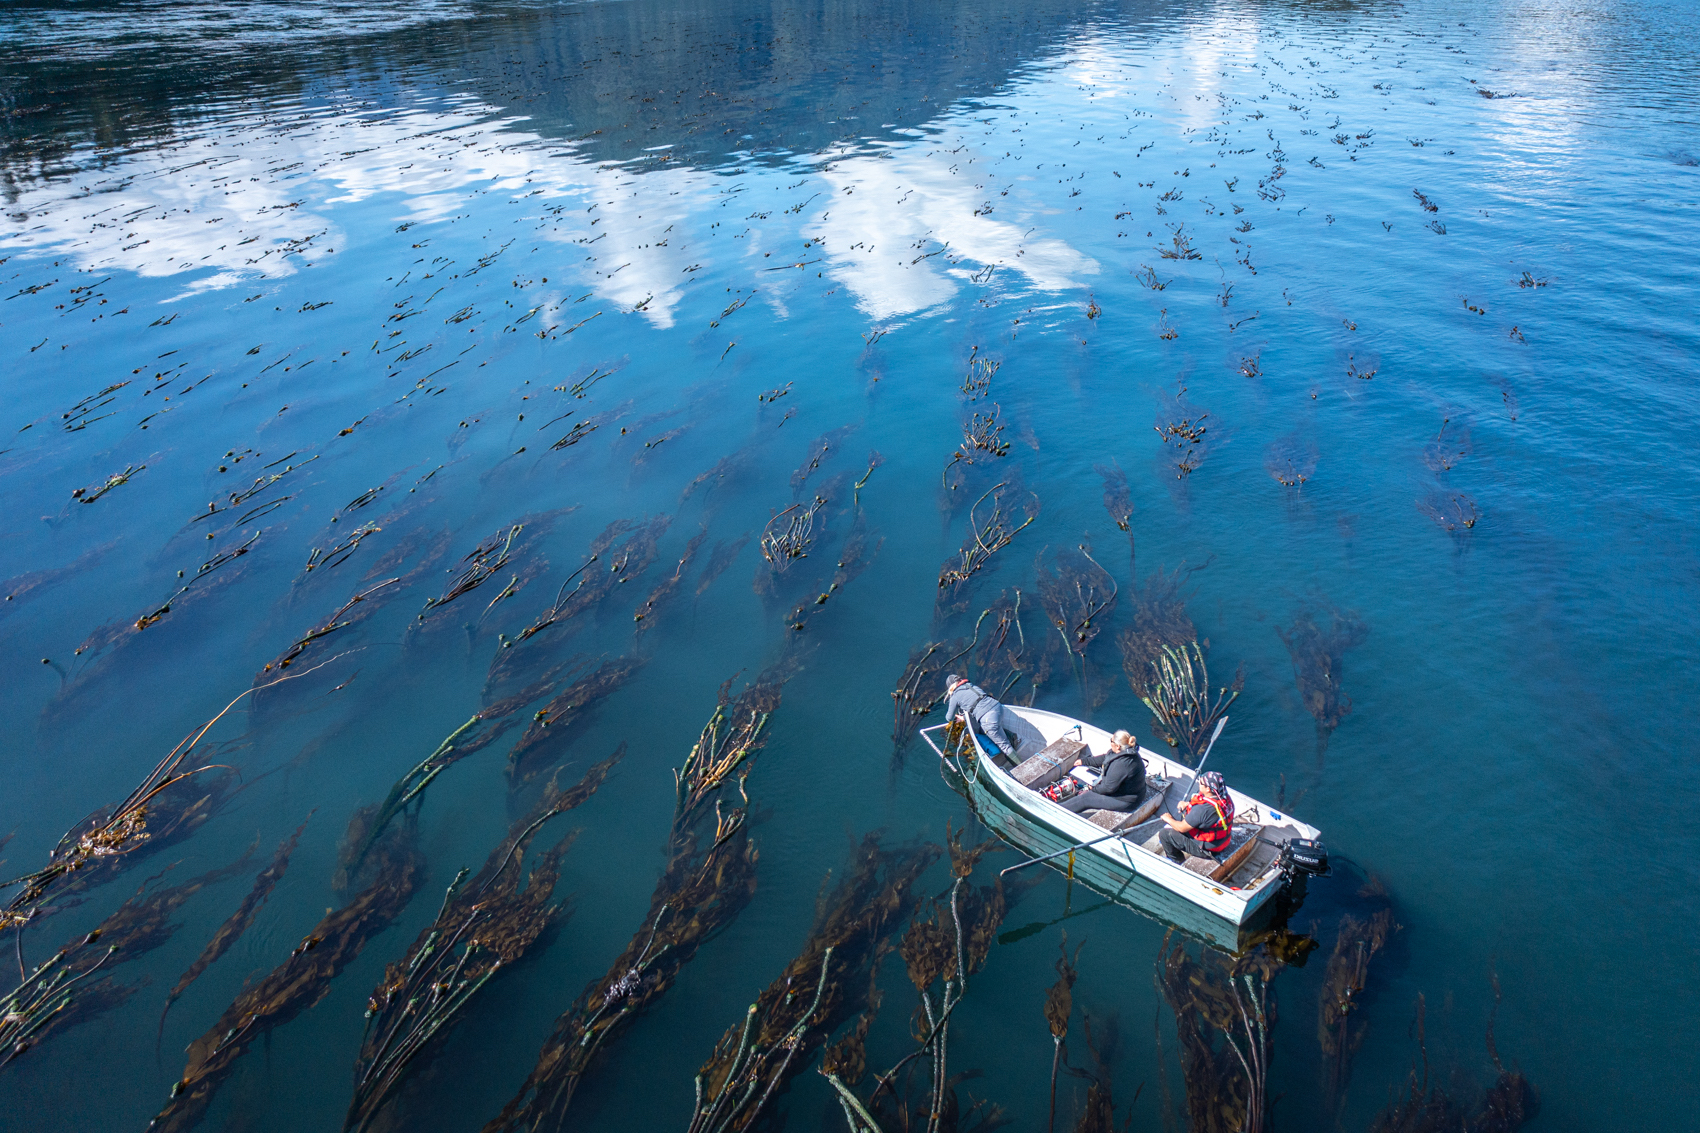 People in a boat harvesting kelp from the sea.